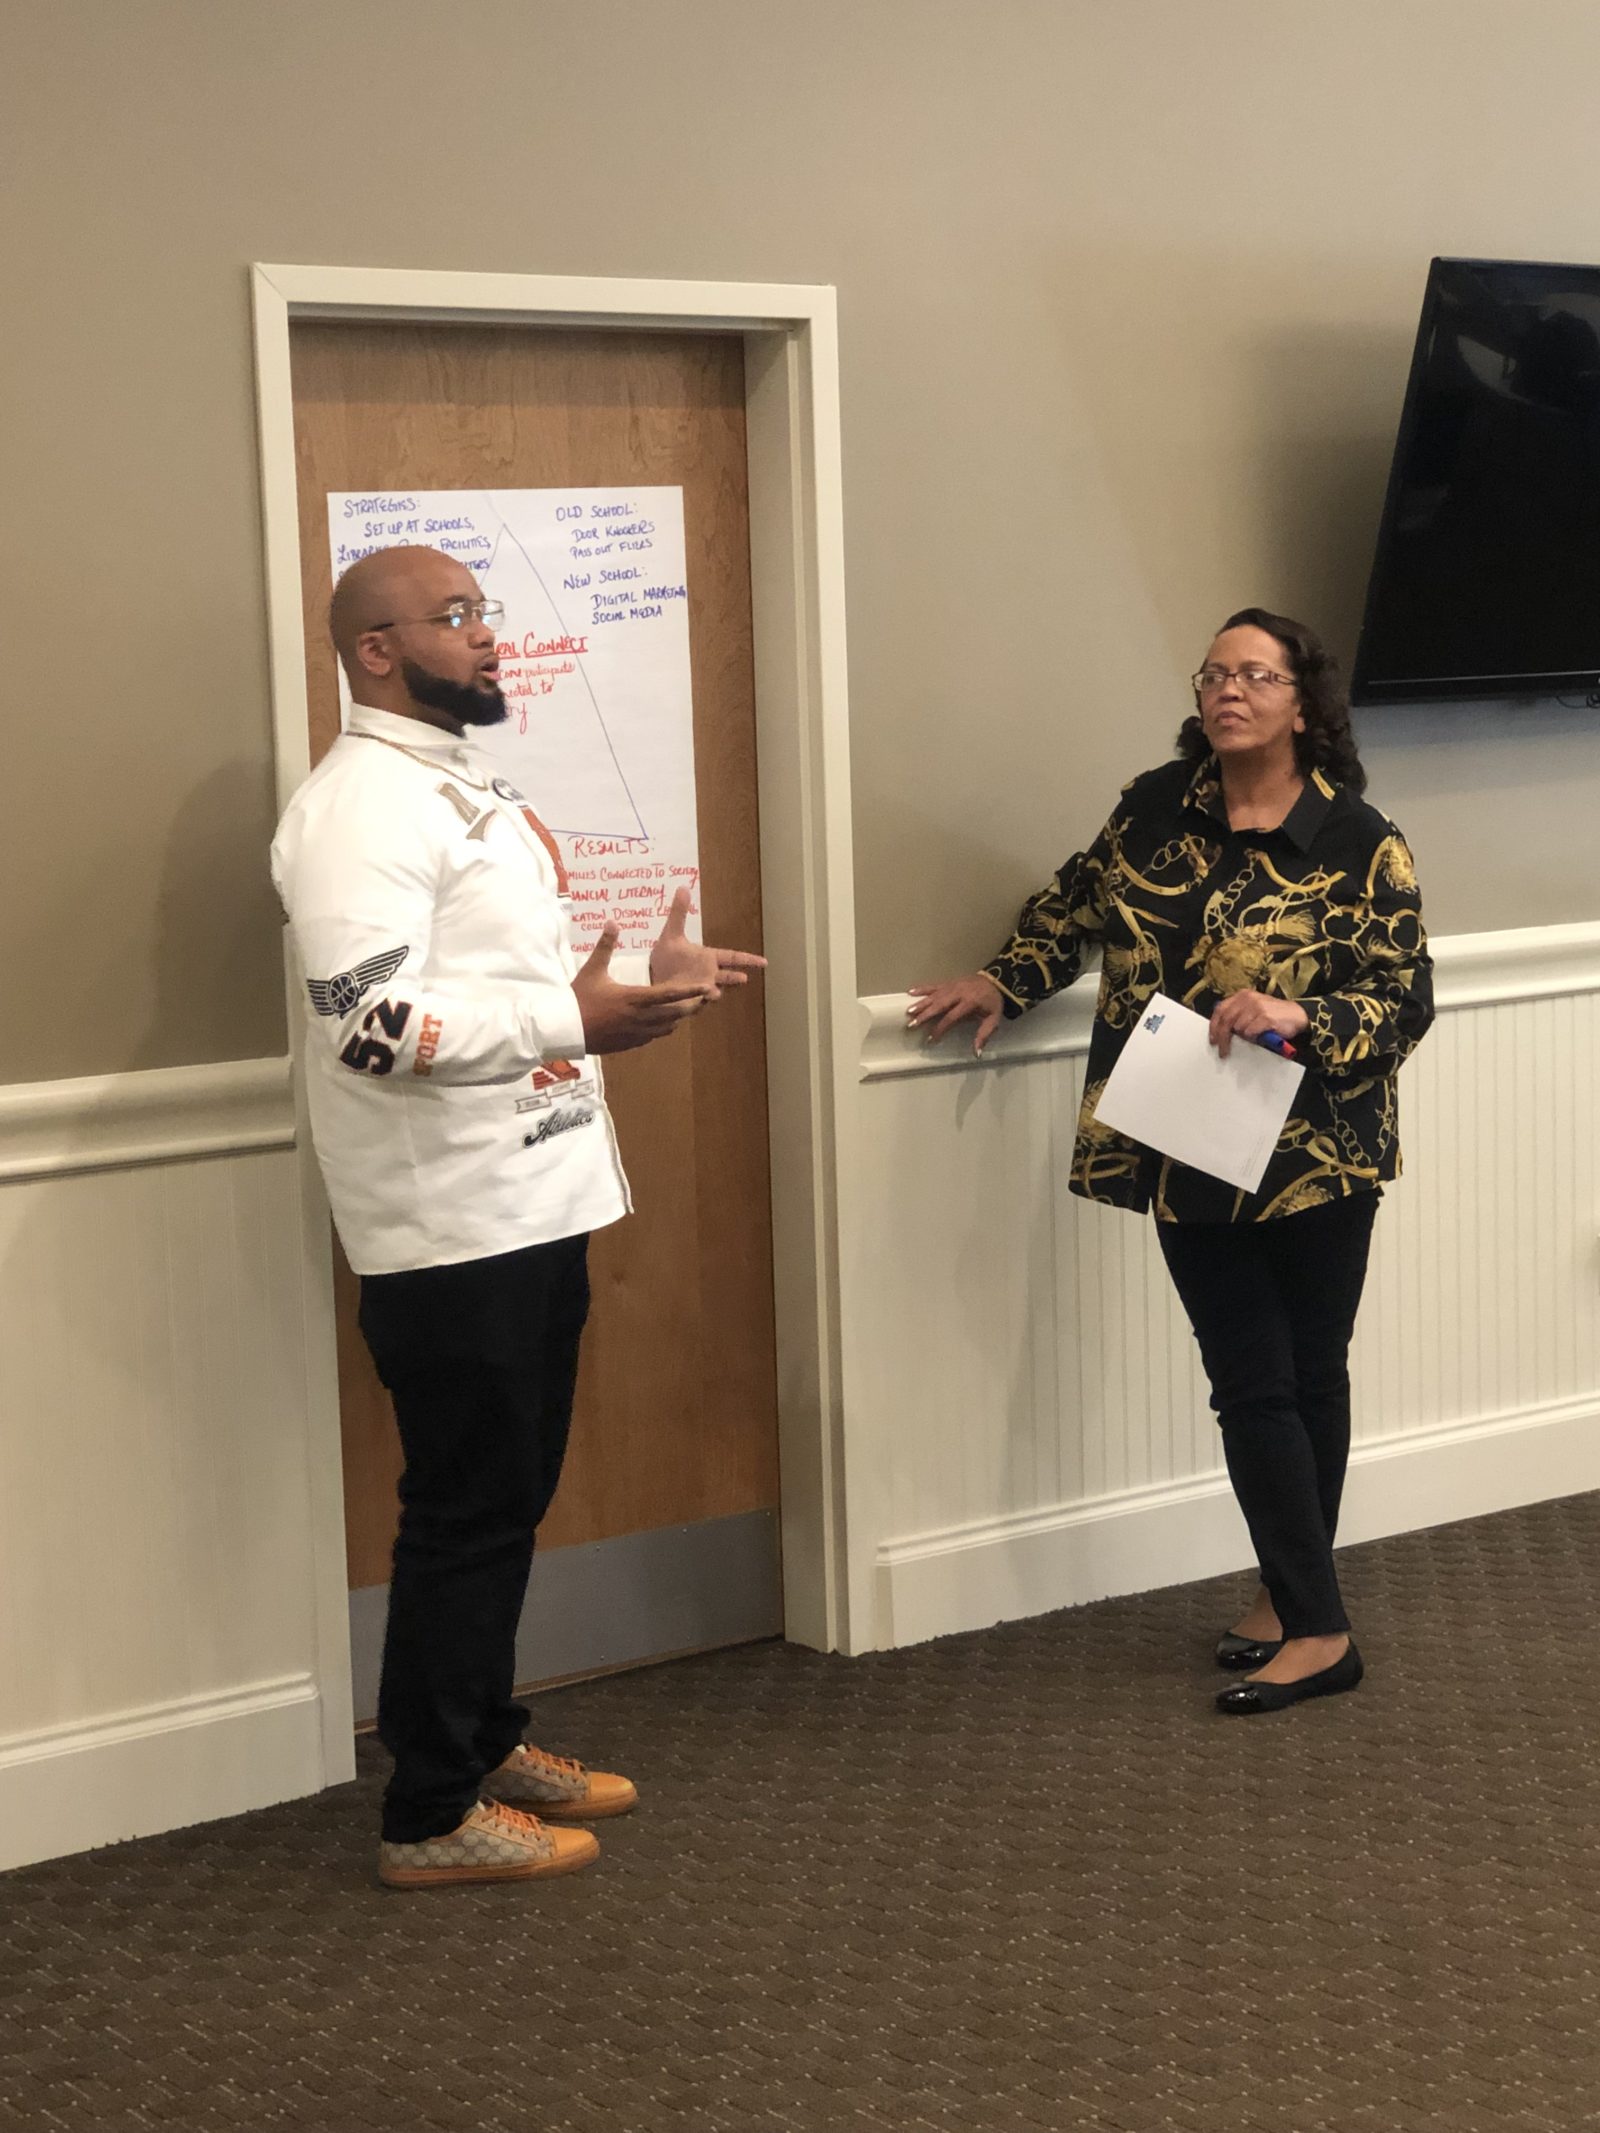 Lester Scott II (L.) and Shauna Barry-Scott from Dare to Dream Children’s Foundation participate in an exercise during the grantee orientation at The Raymond John Wean Foundation on Thursday, April 28. Grants were awarded to eight grassroots groups in Warren and Youngstown through Neighborhood SUCCESS Grants, a program of the Wean Foundation.